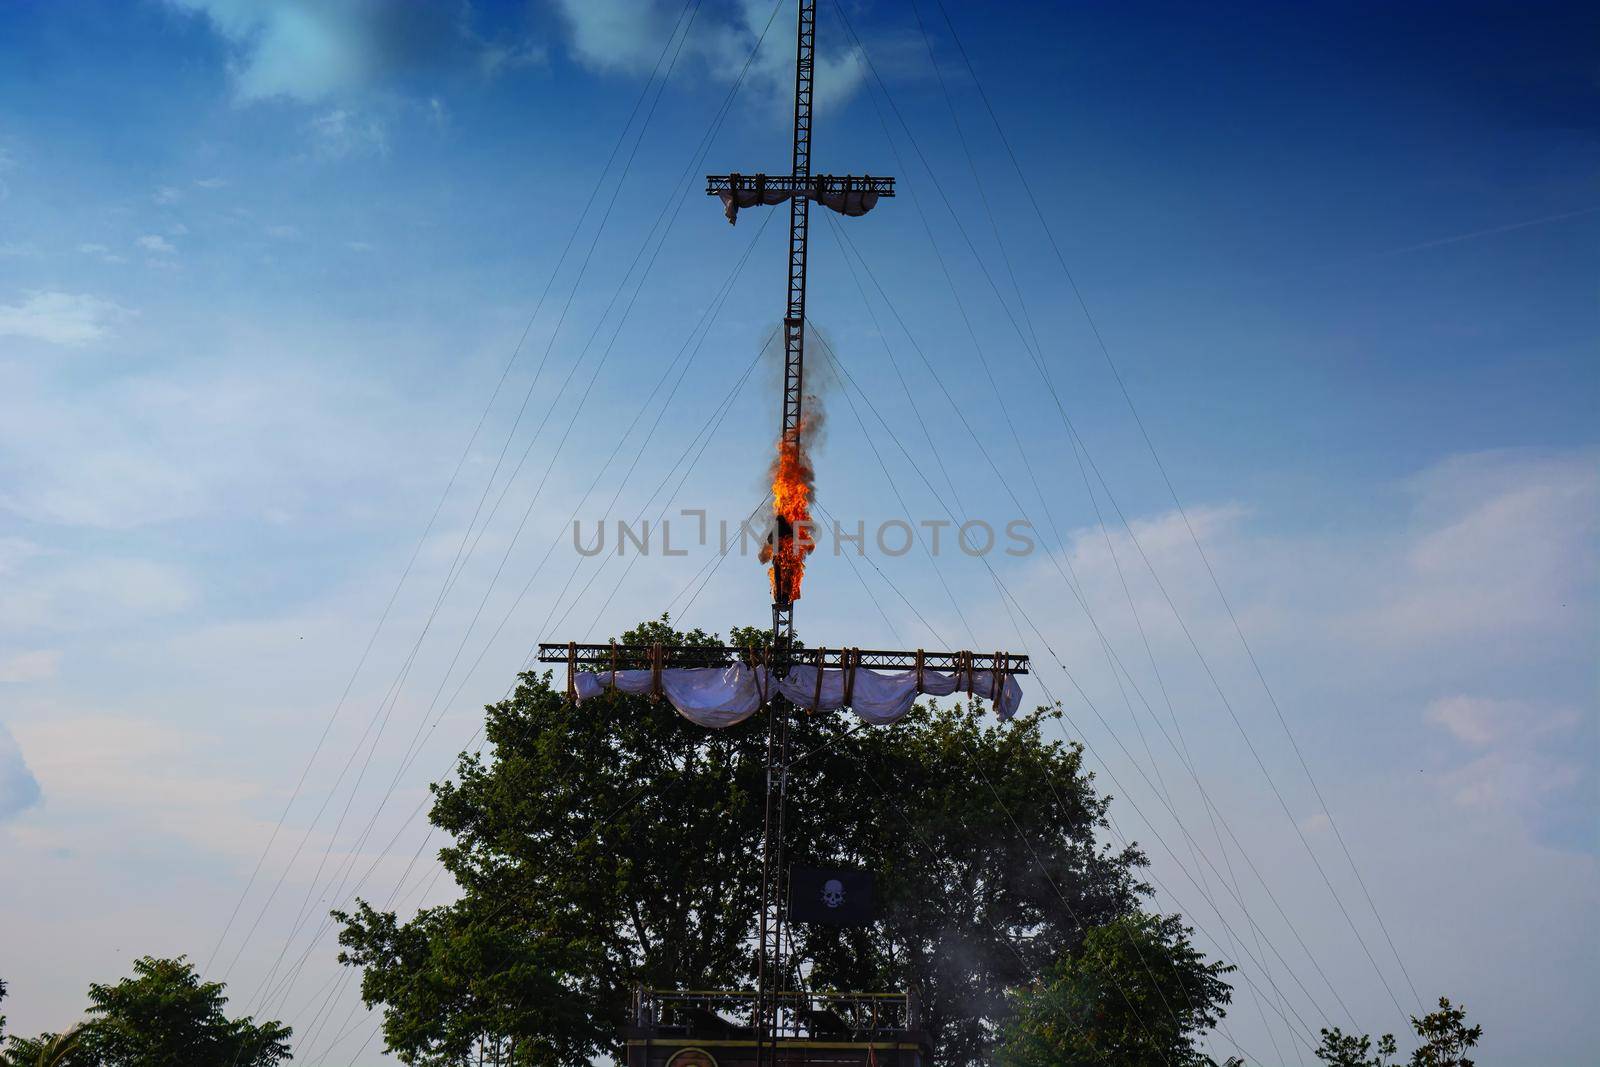 Amusement park show event of a pirate race. A man spring burning from a mast Holland, Europe.